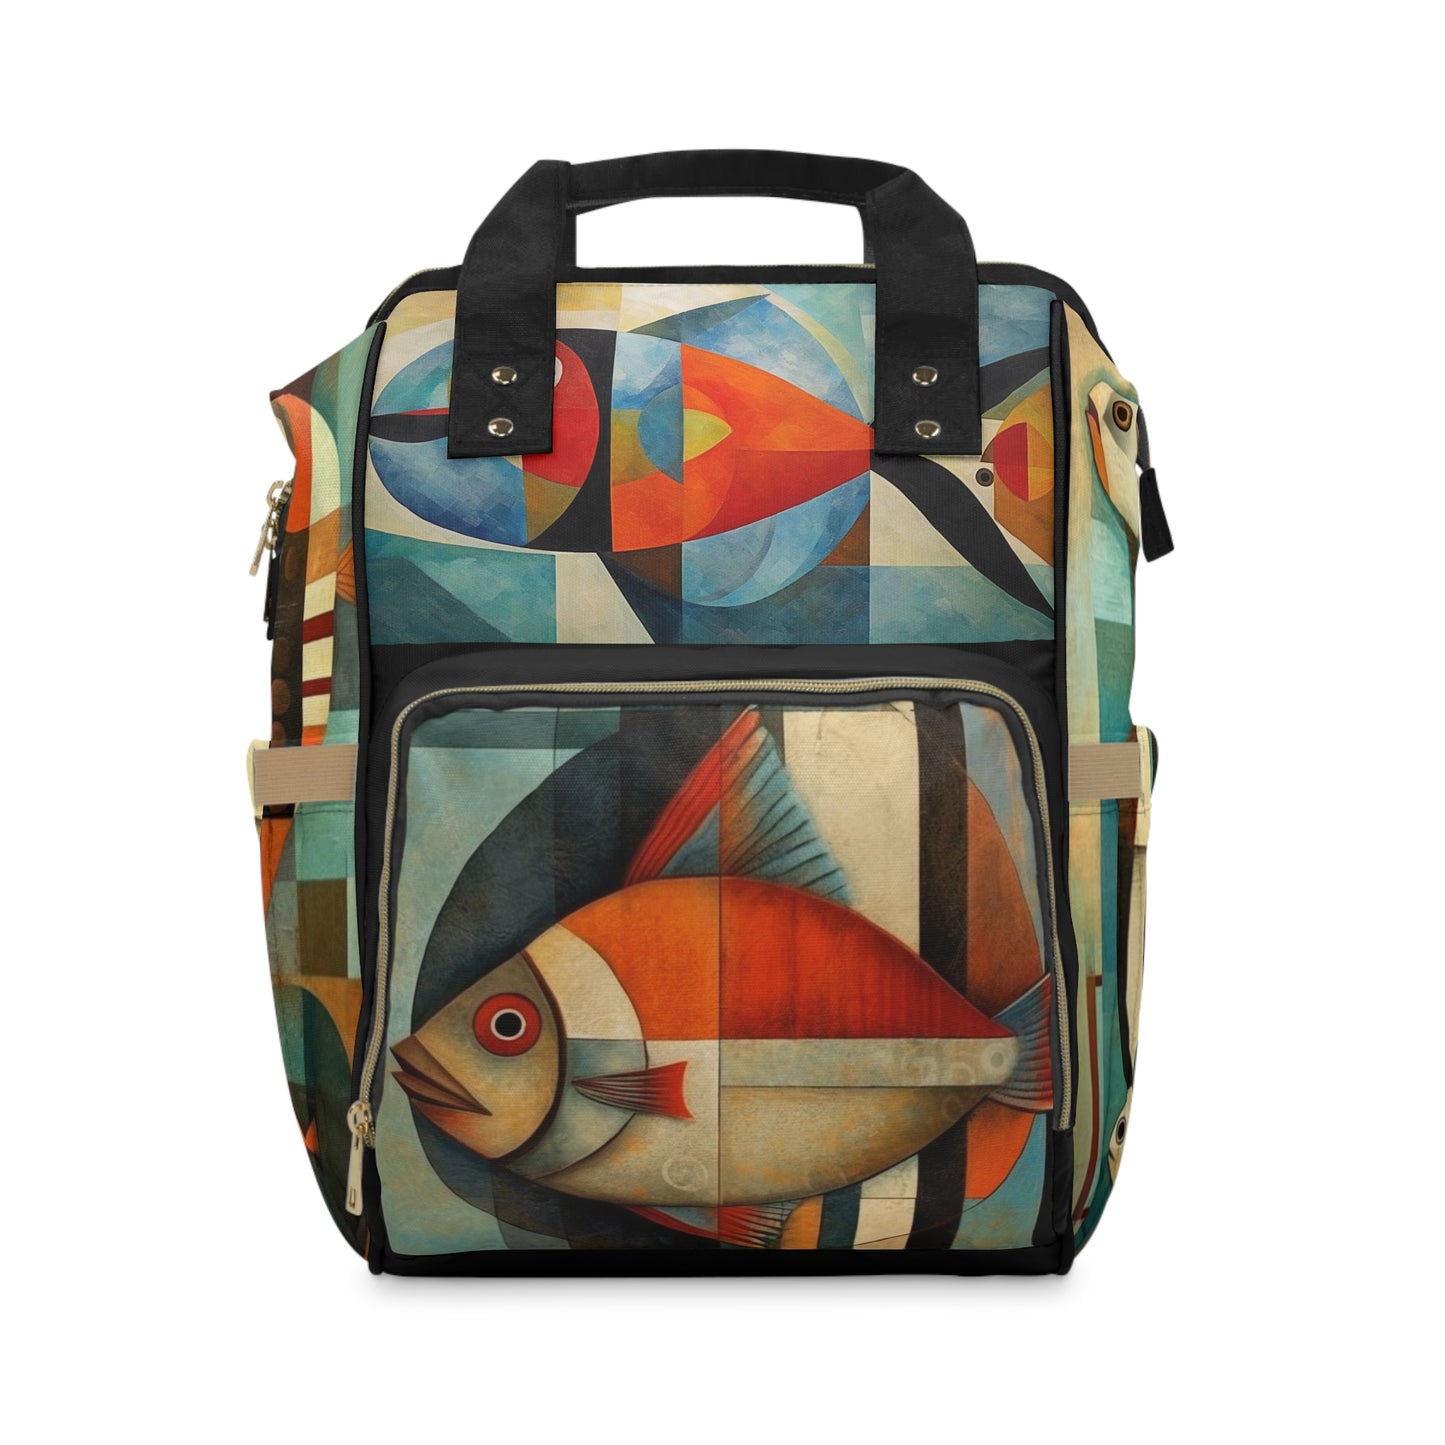 Fishes Multifunctional Diaper Backpack